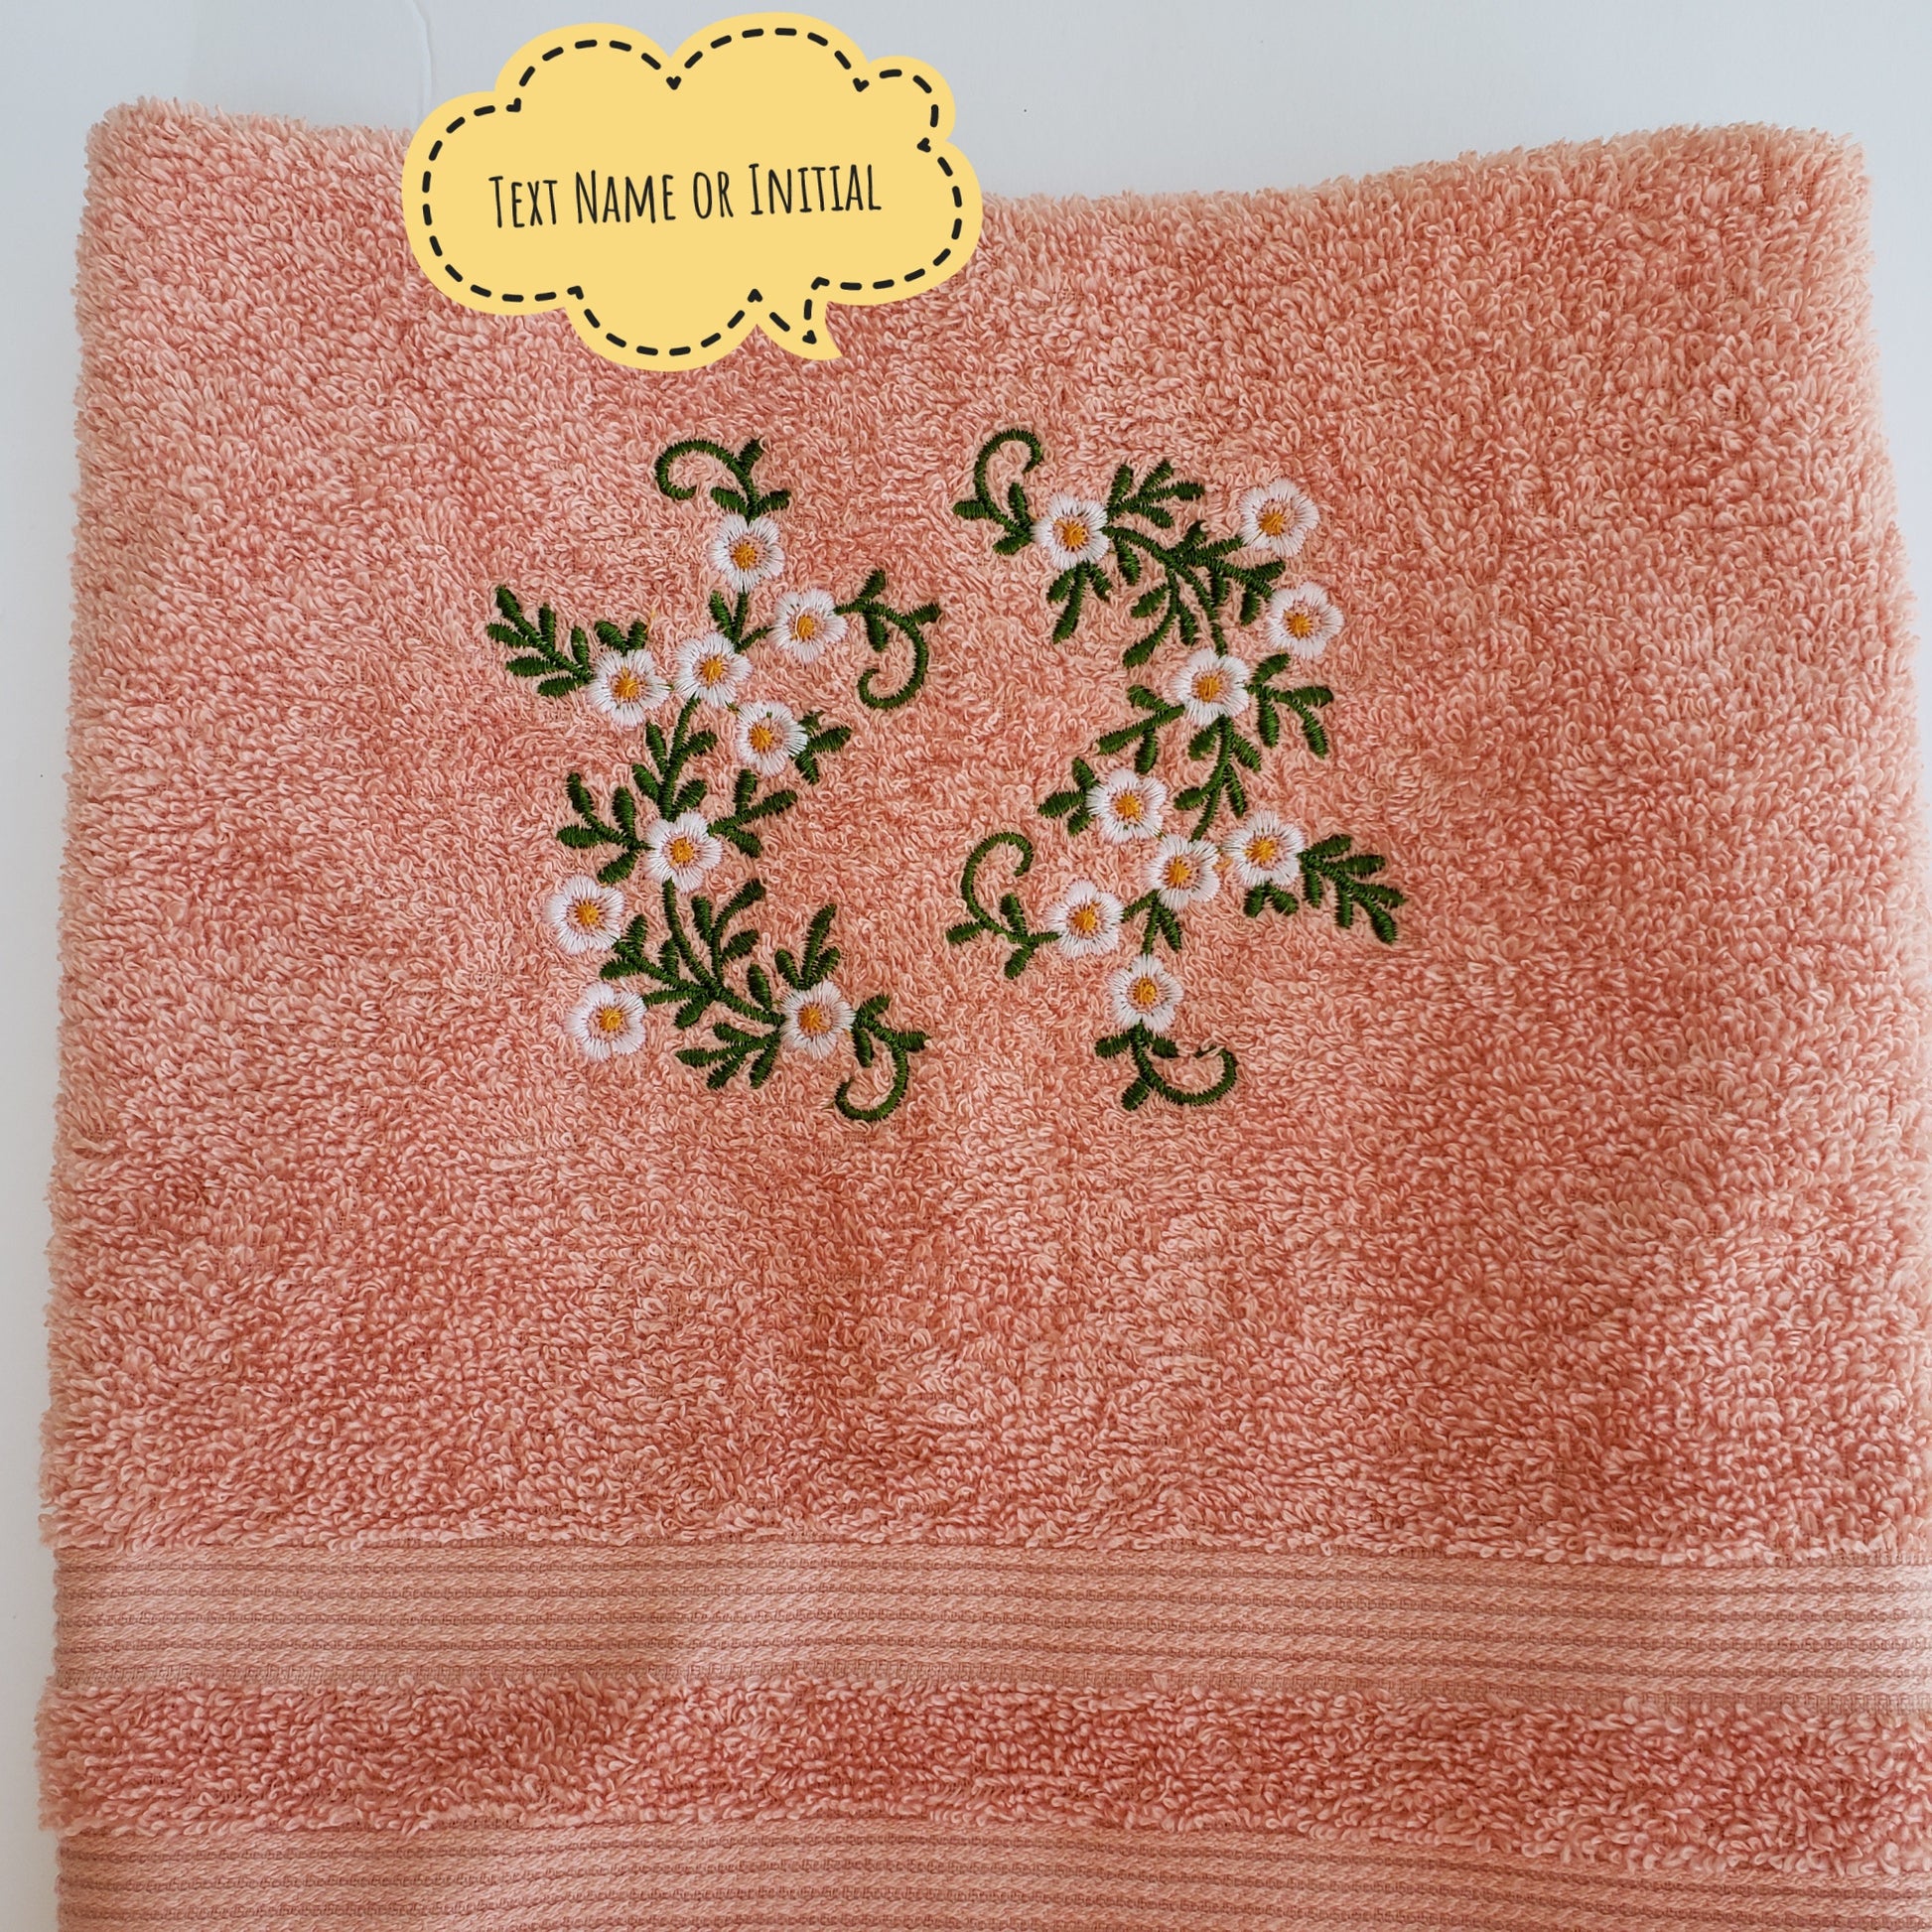 personalized embroidery towel